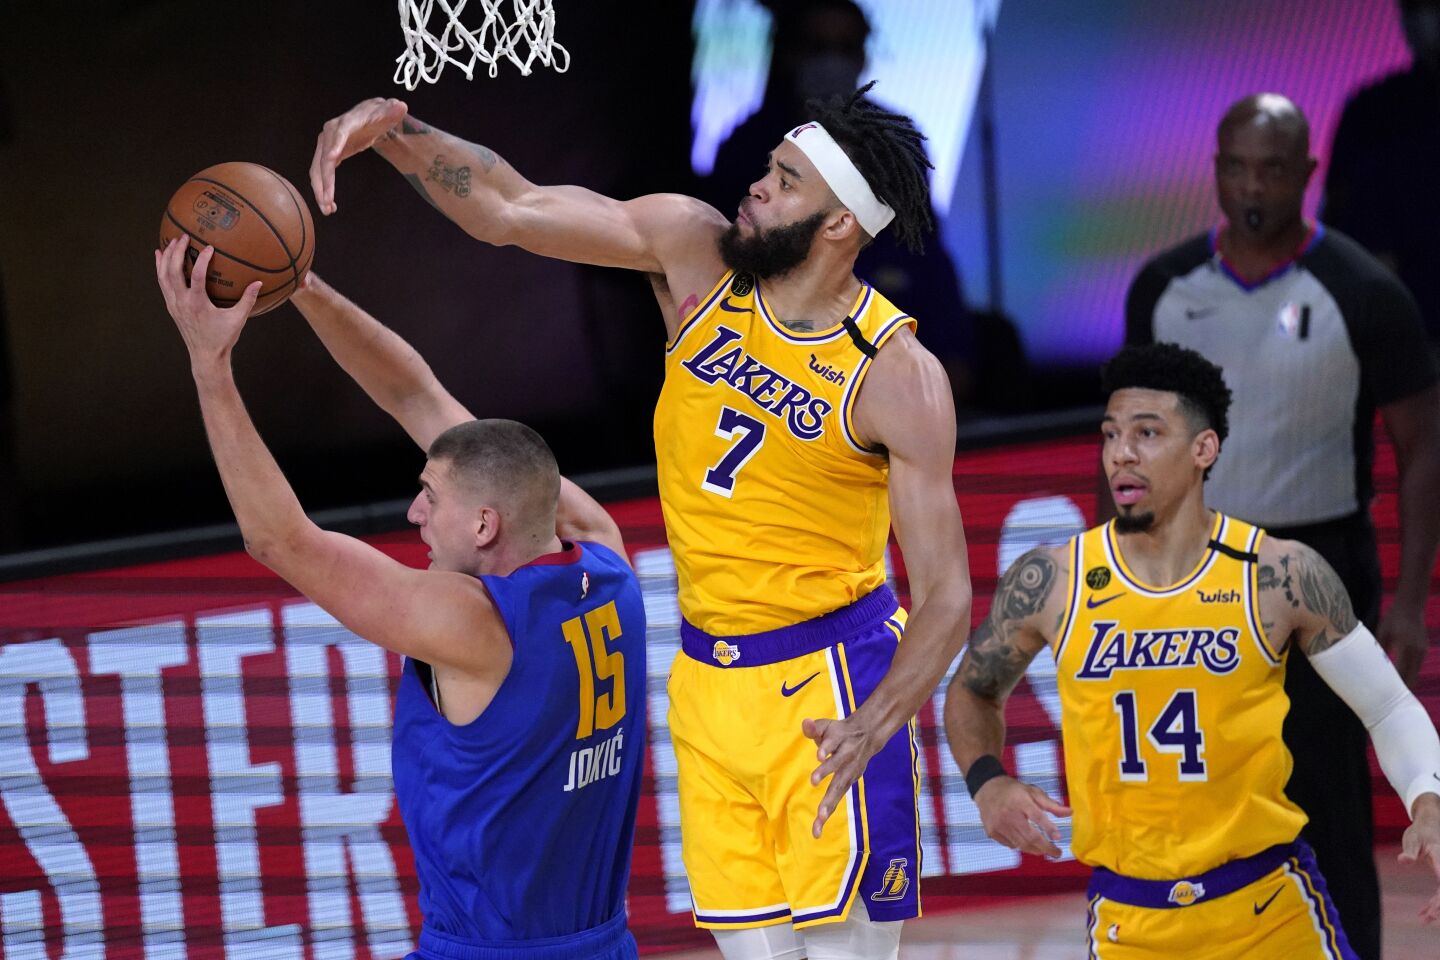 Lakers center JaVale McGee challenges Nuggets center Nikola Jokic for a rebound during Game 1.